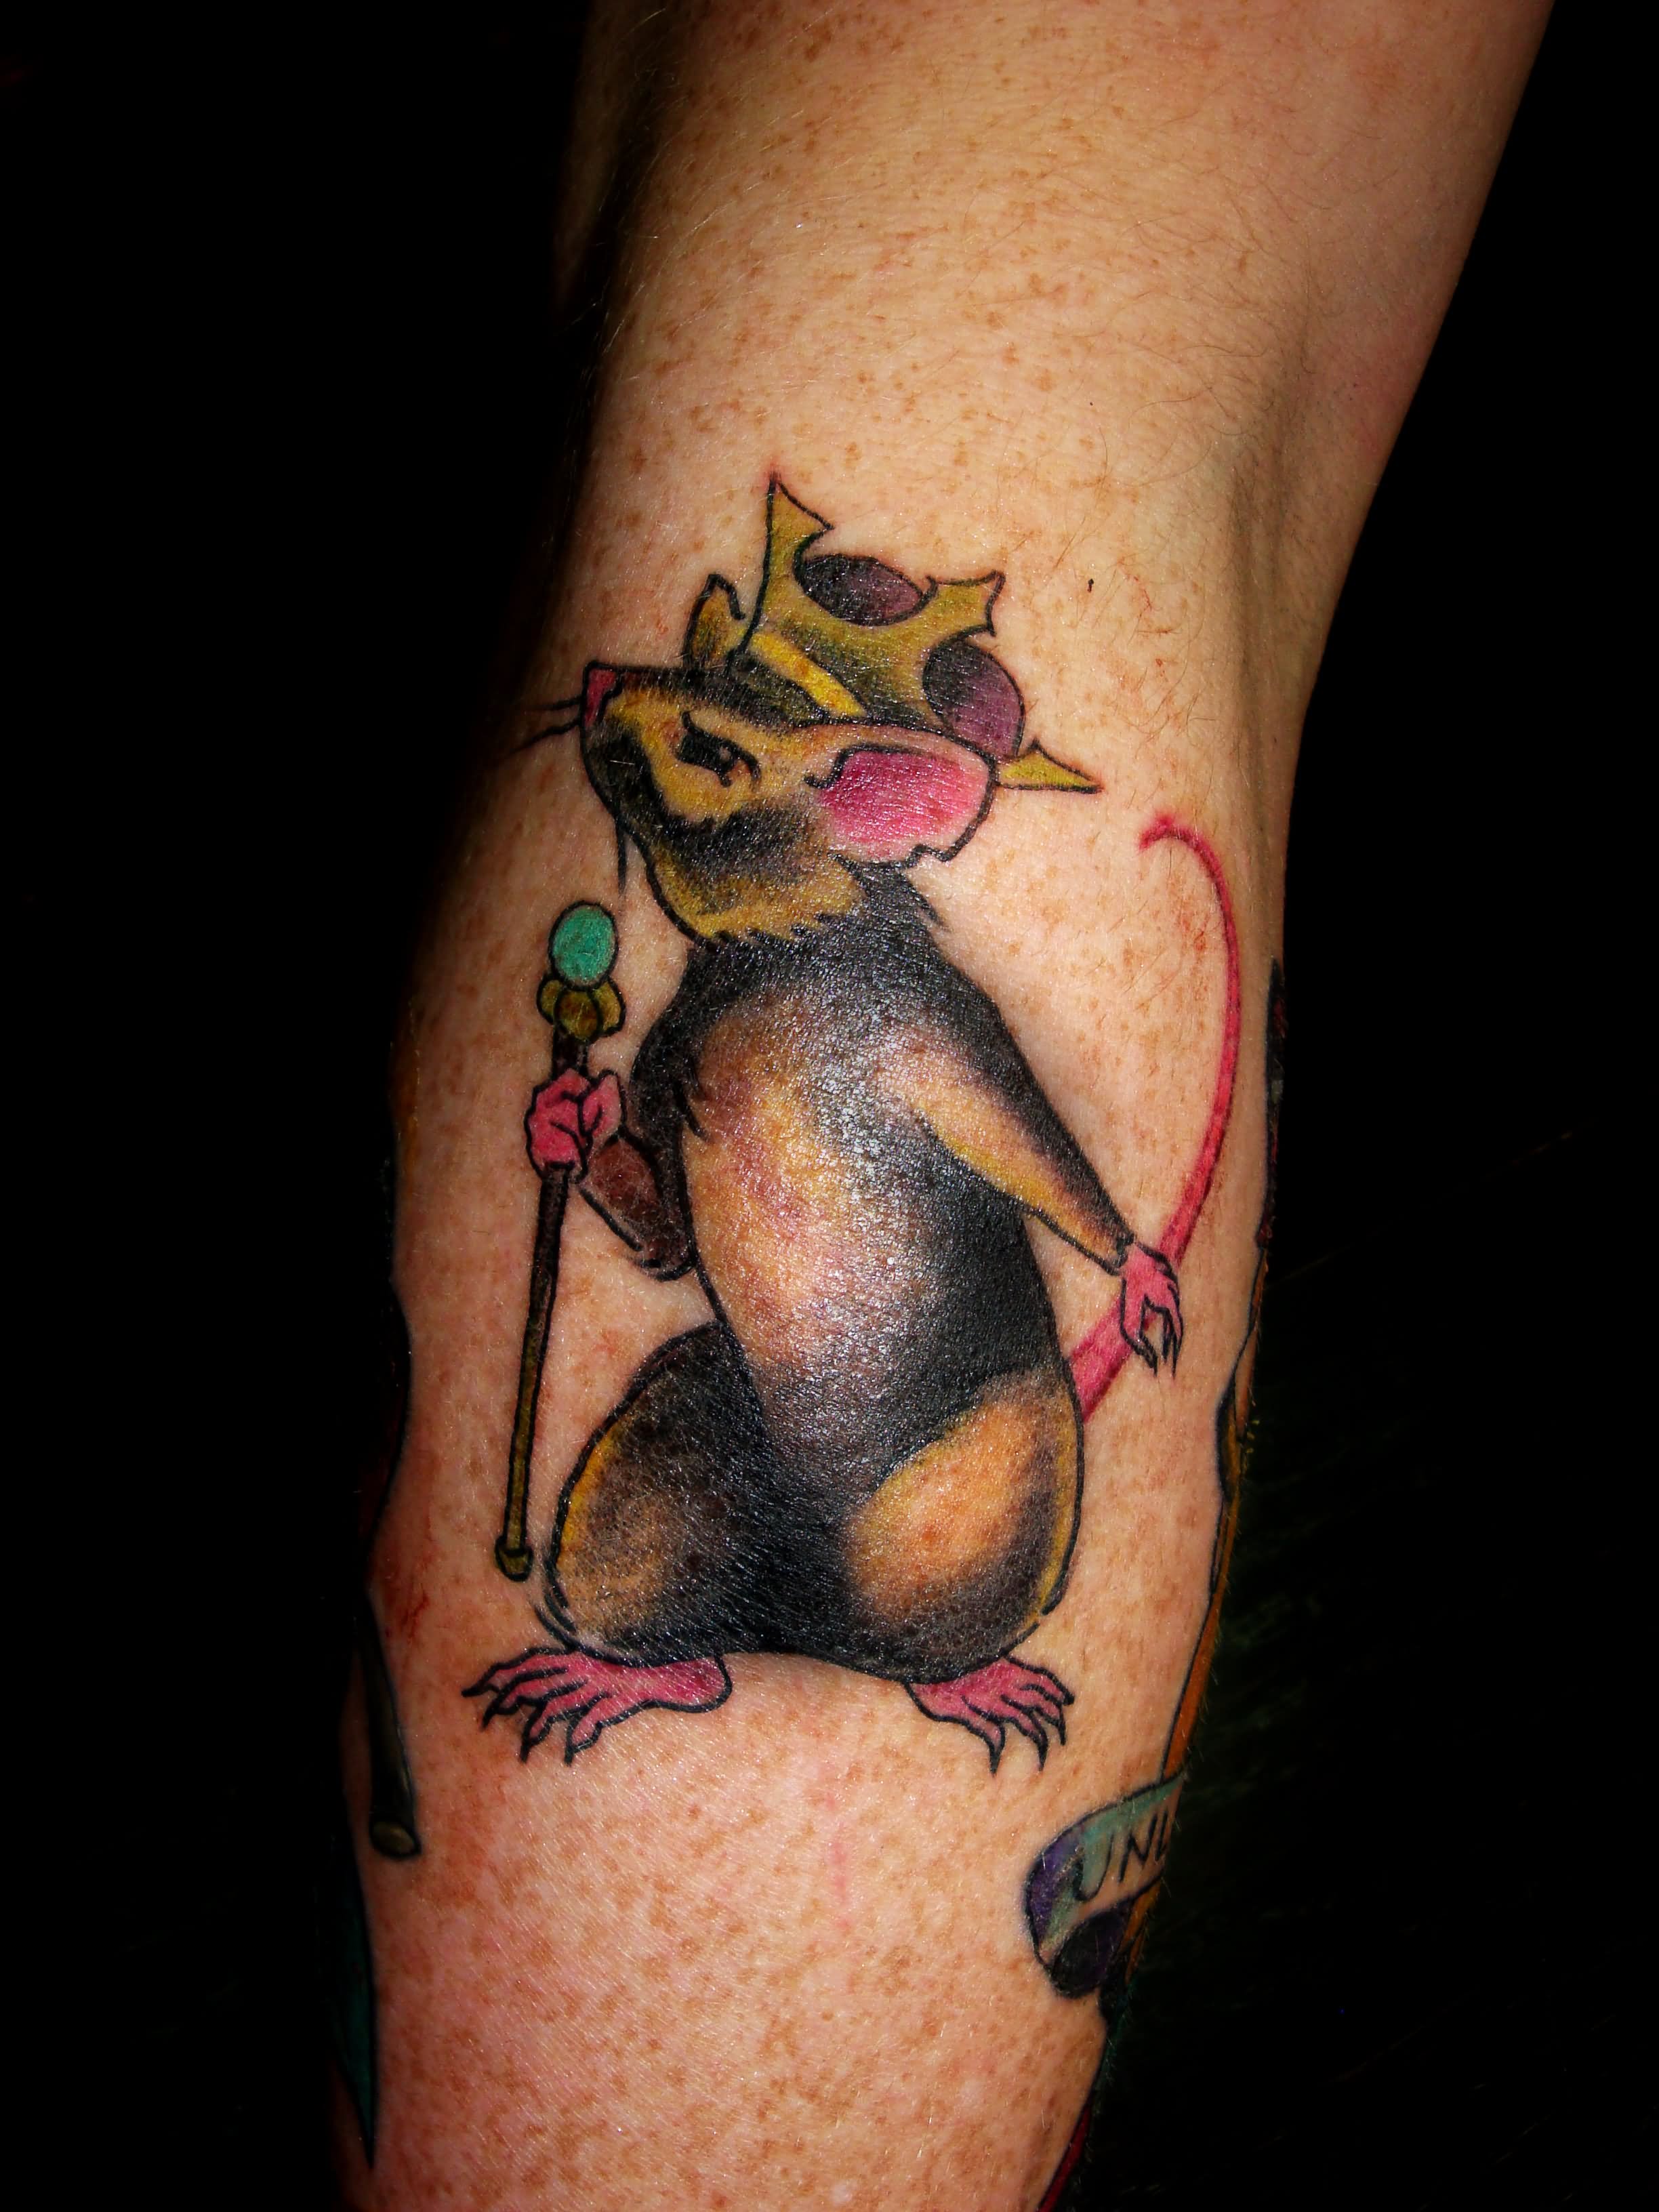 Colorful Rat With Crown Tattoo On Forearm